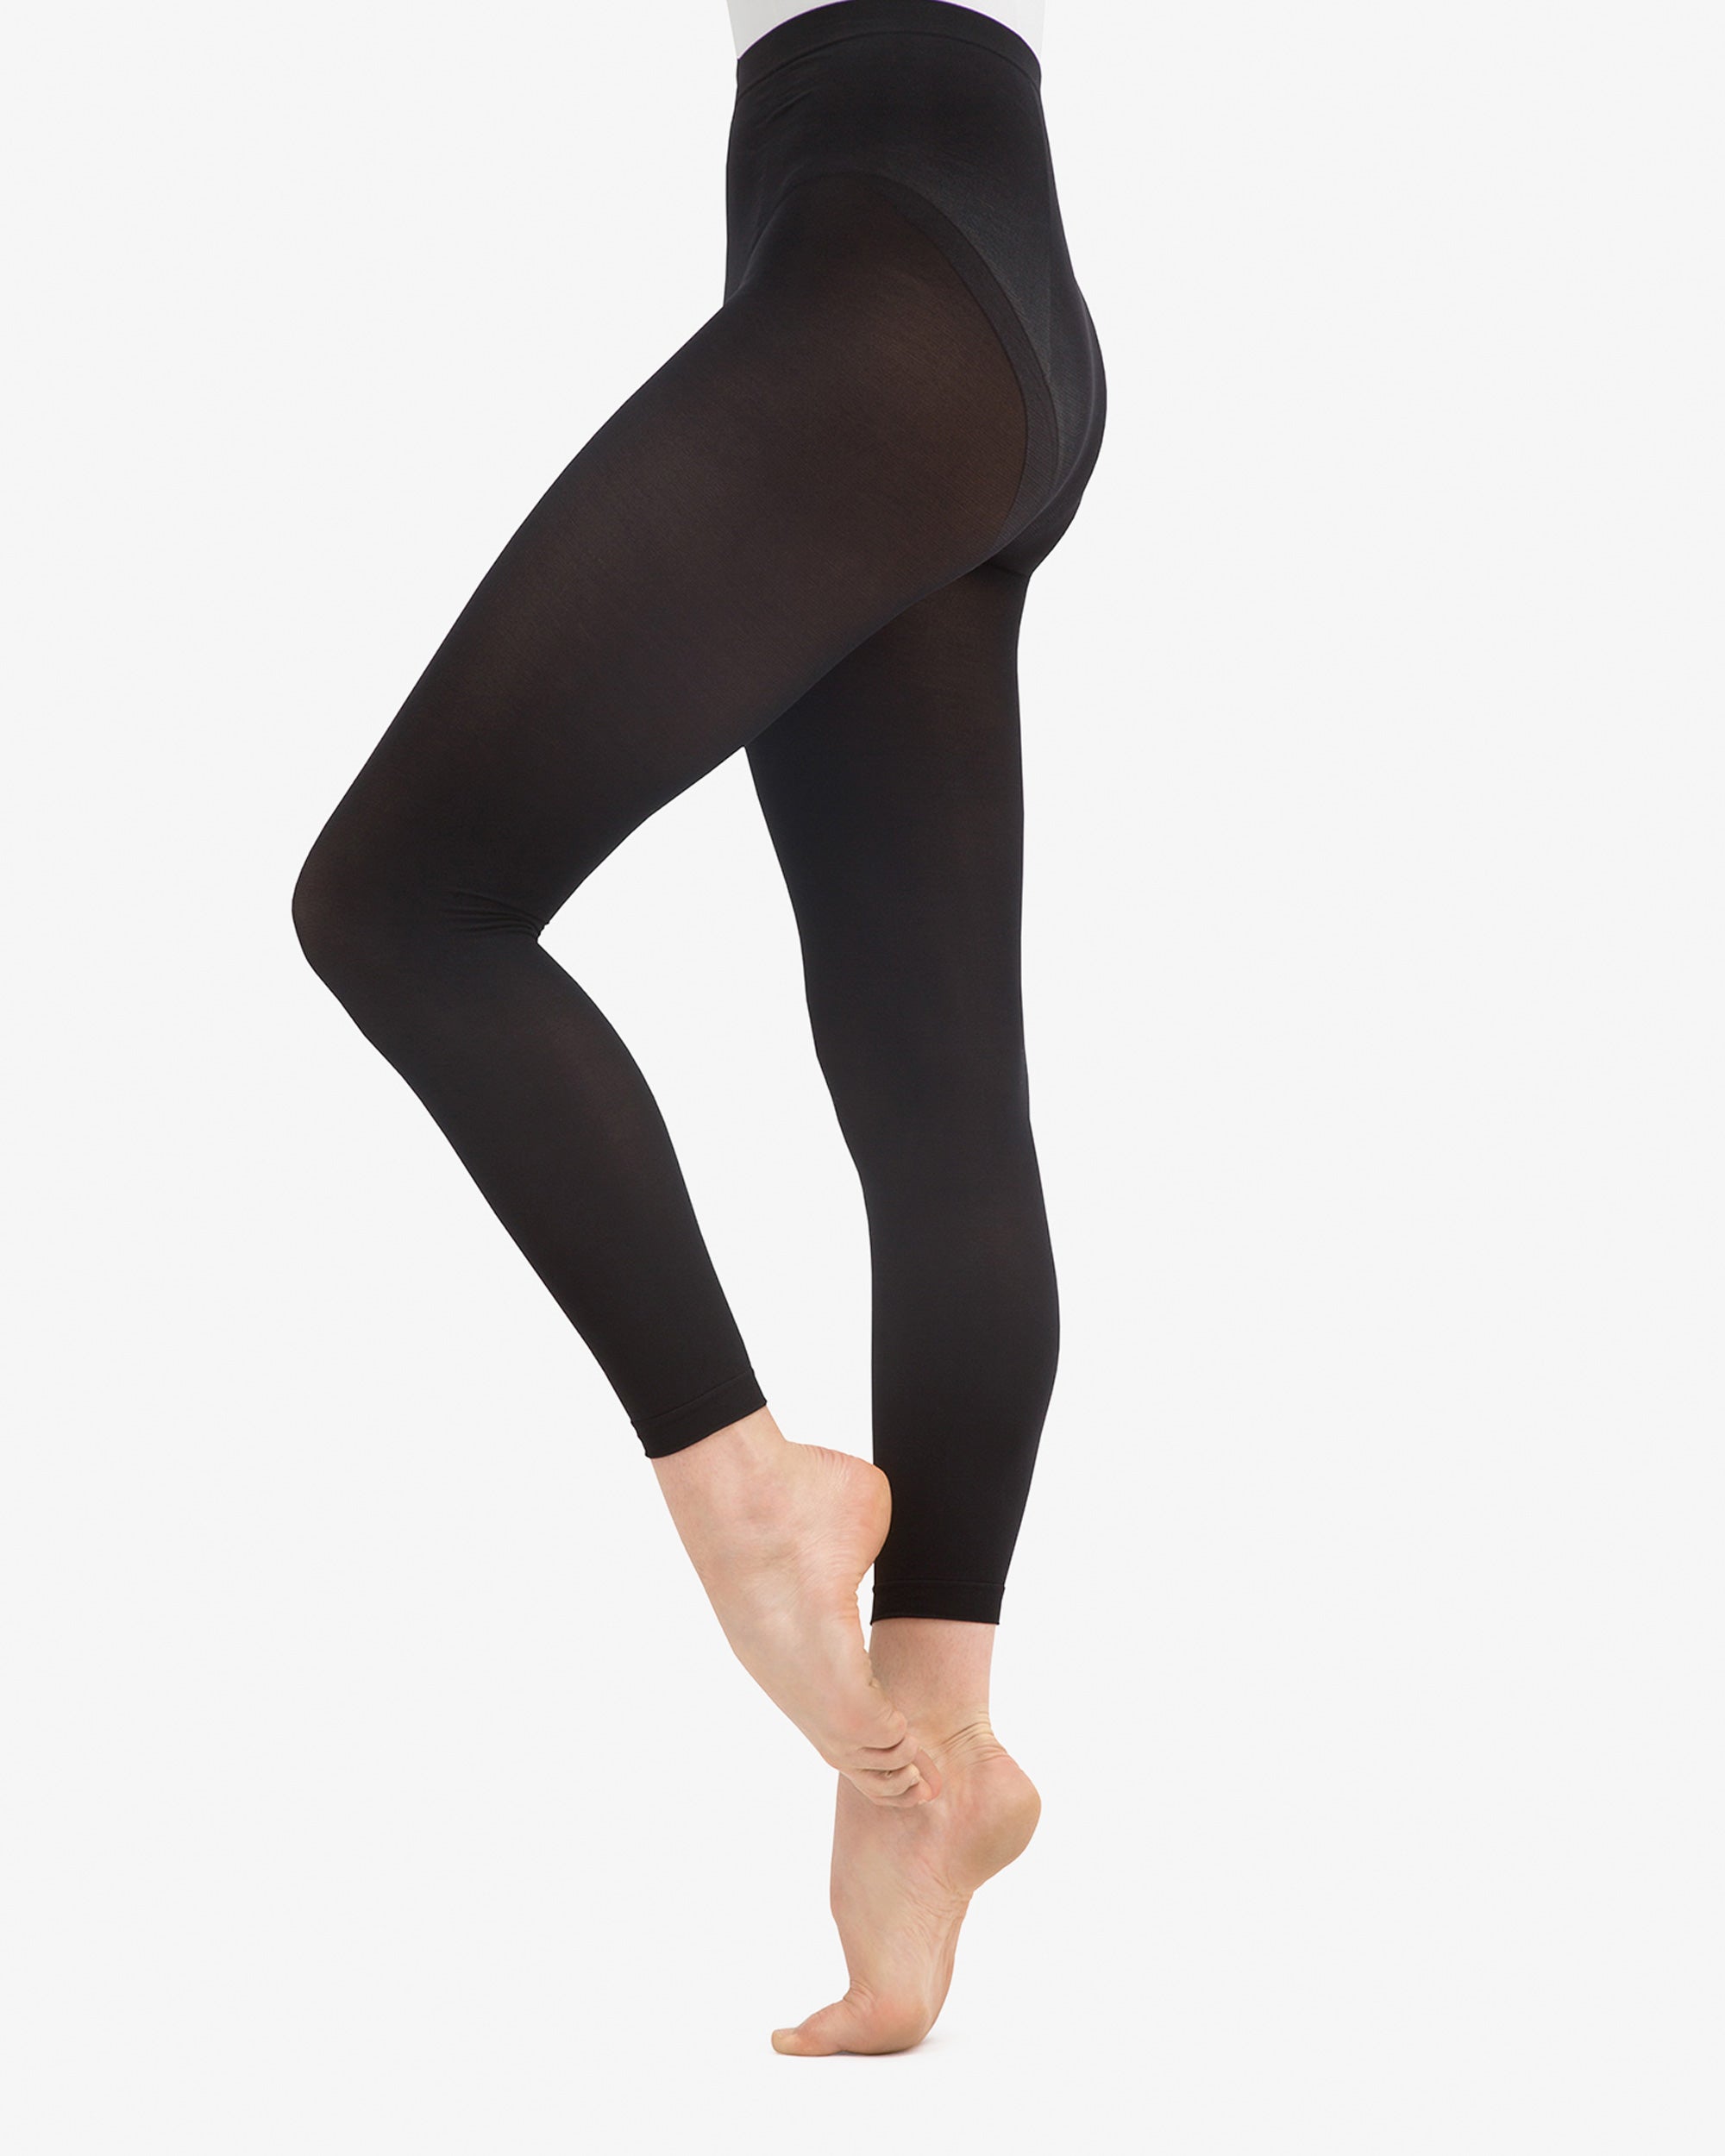 Footless Tights For Dance, Woman Footless Tights For Sale